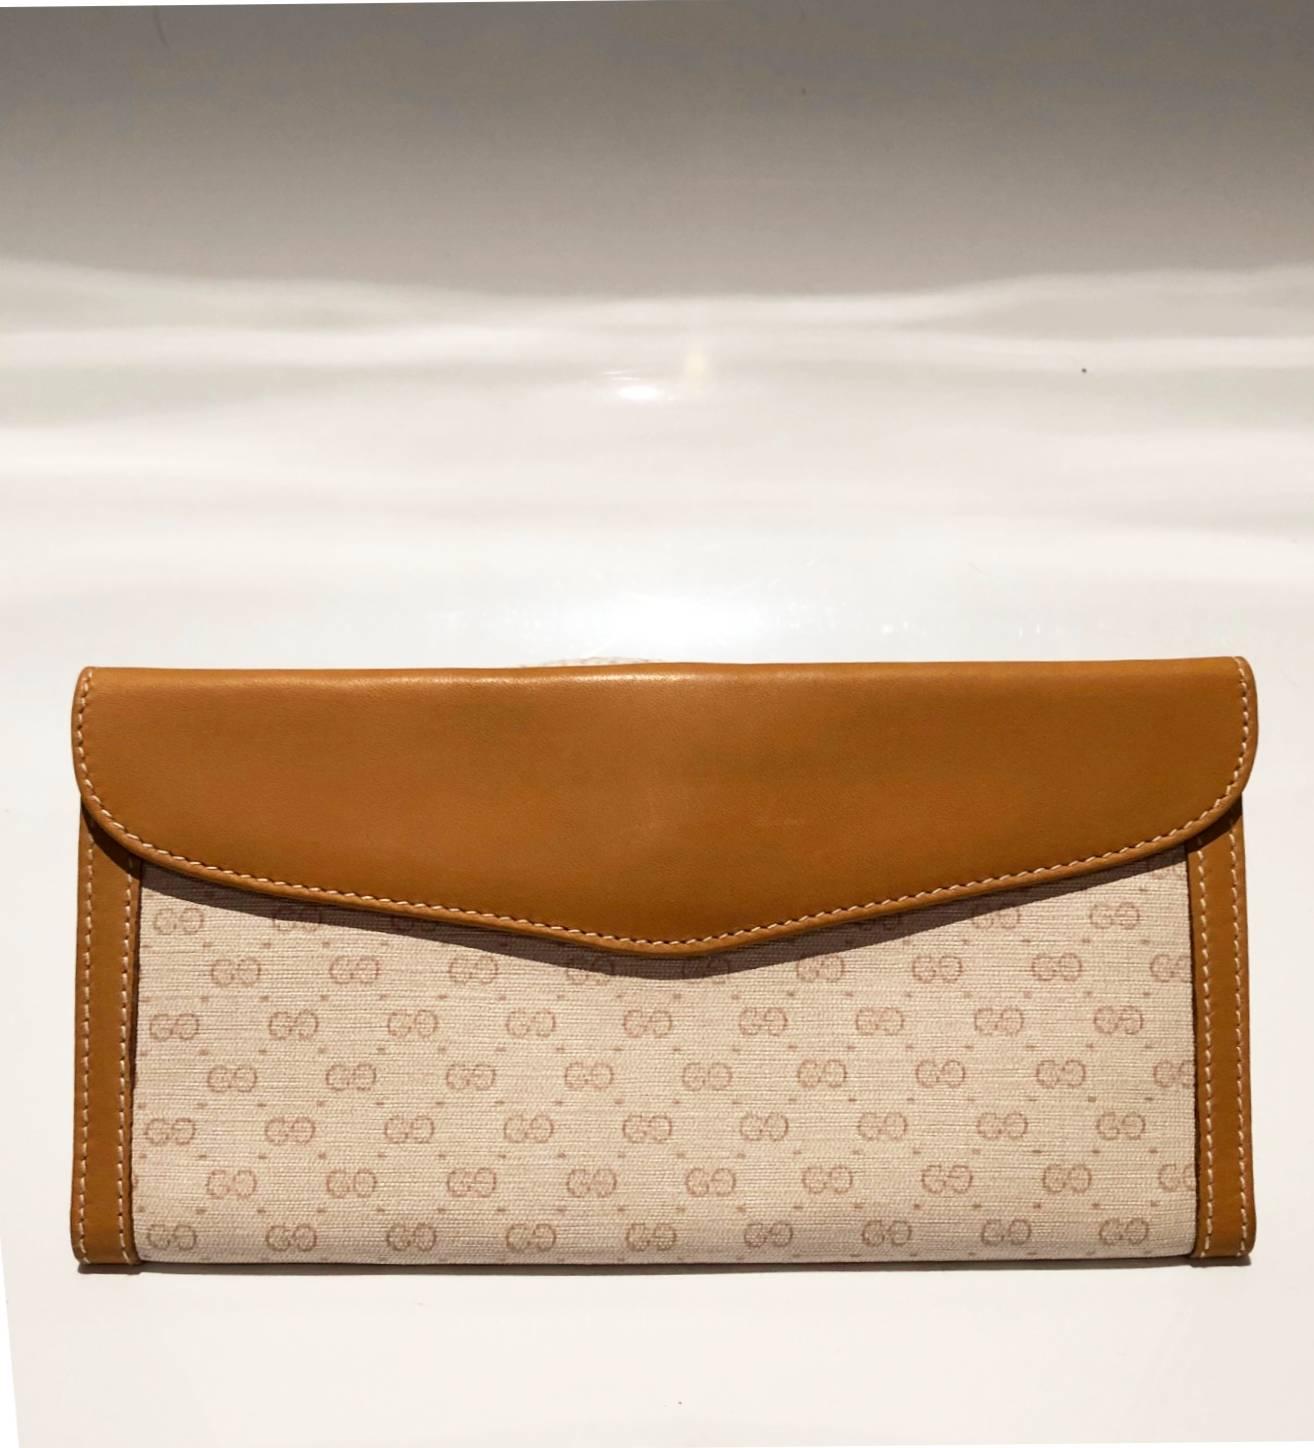 This is a rare Gucci interlocking logo clutch monogram wallet, tan leather and gold-ware, internal compartments and back pocket for coins
Condition: vintage, 1980s, never worn, in excellent condition, gold-ware in very good shiny condition, no